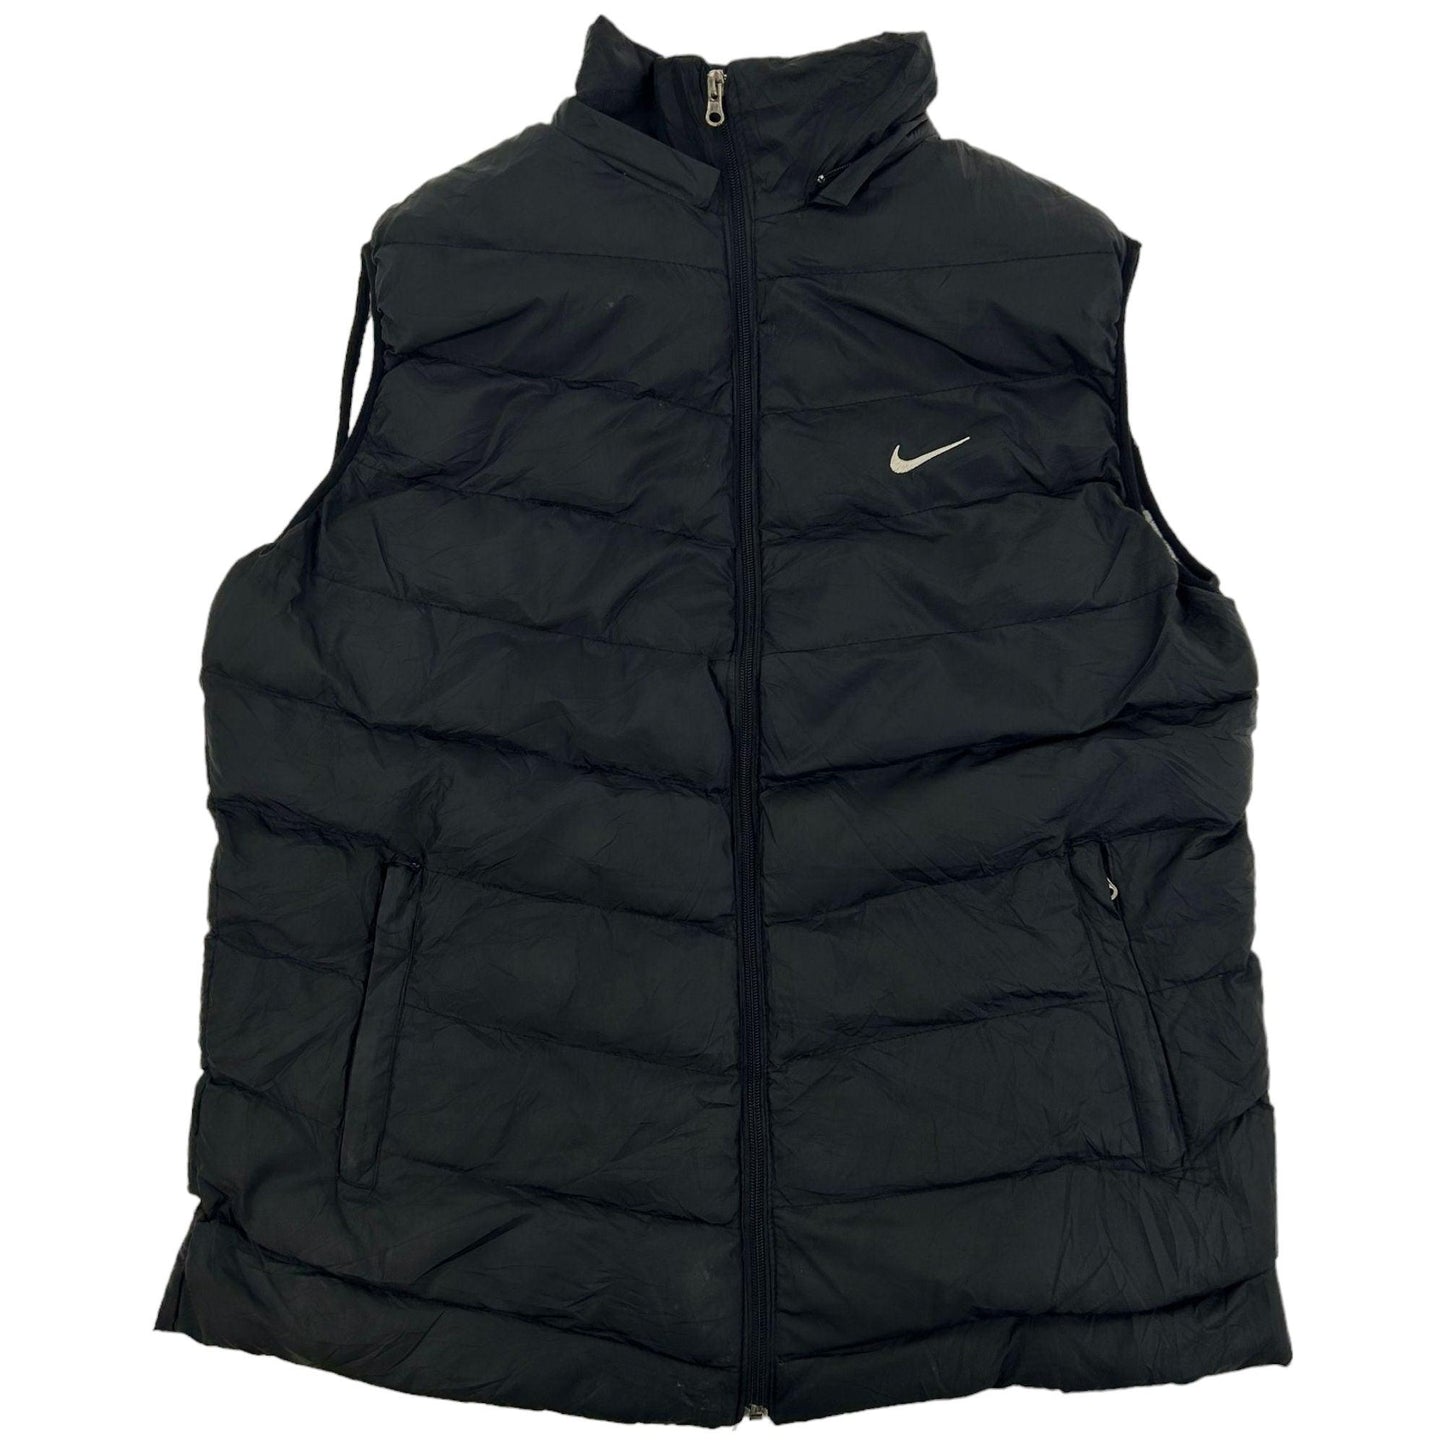 Vintage Nike Gilet Puffer Jacket Size M - Known Source